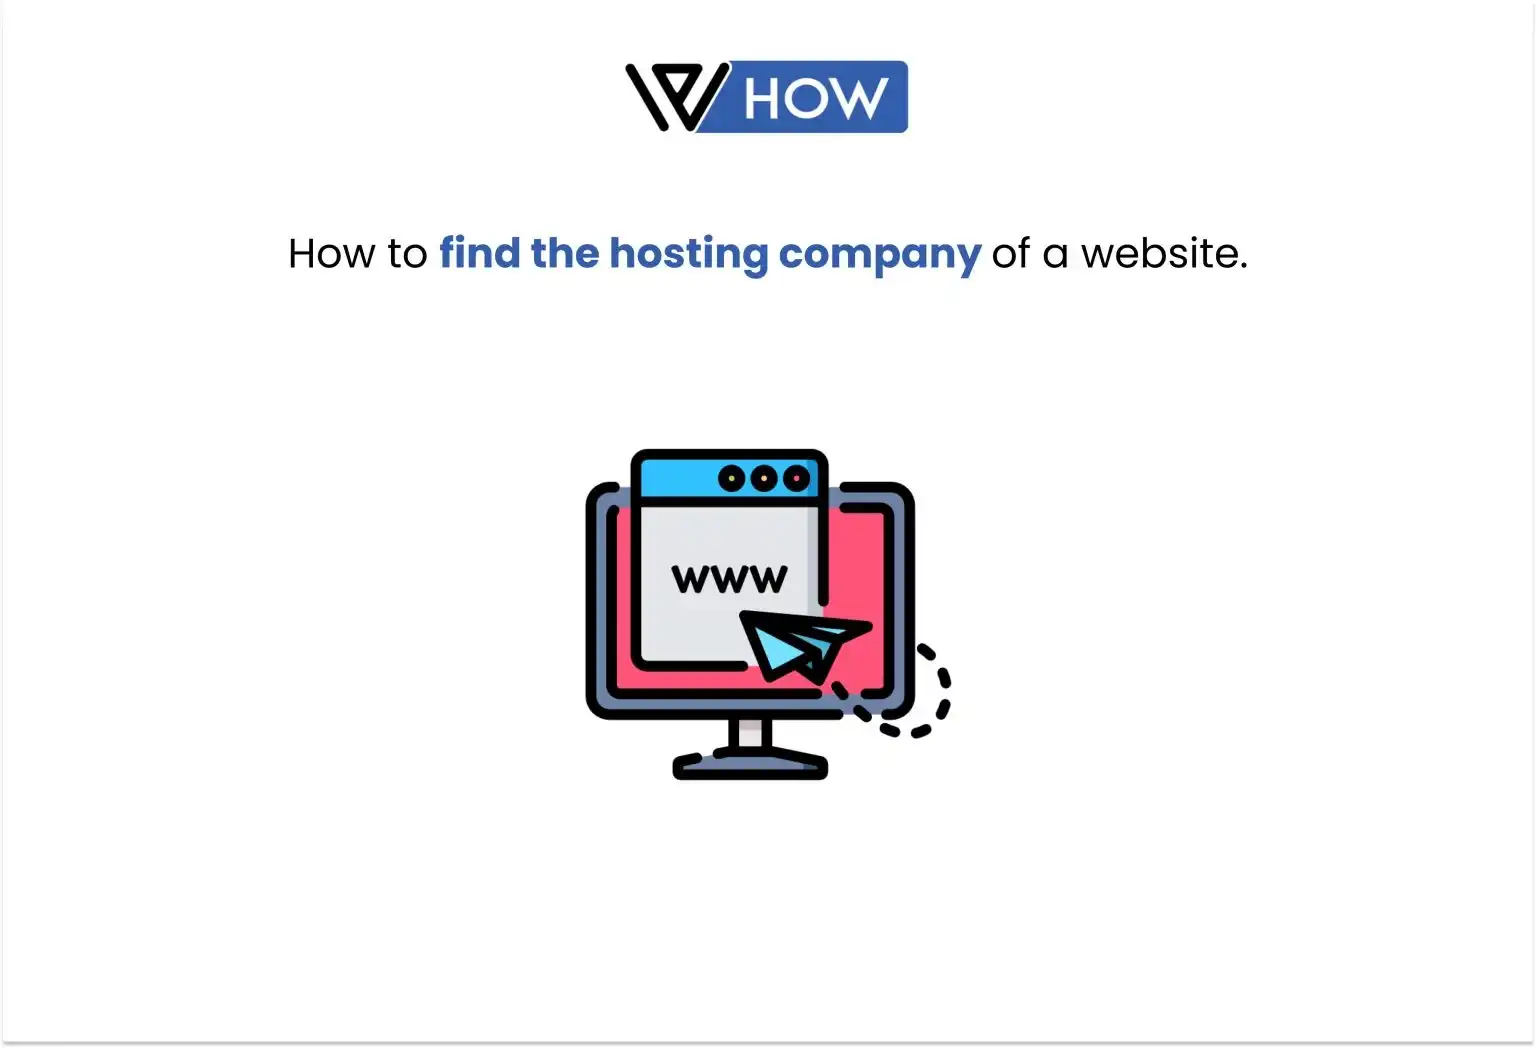 How to find the hosting company of a website in the best ways - Title image